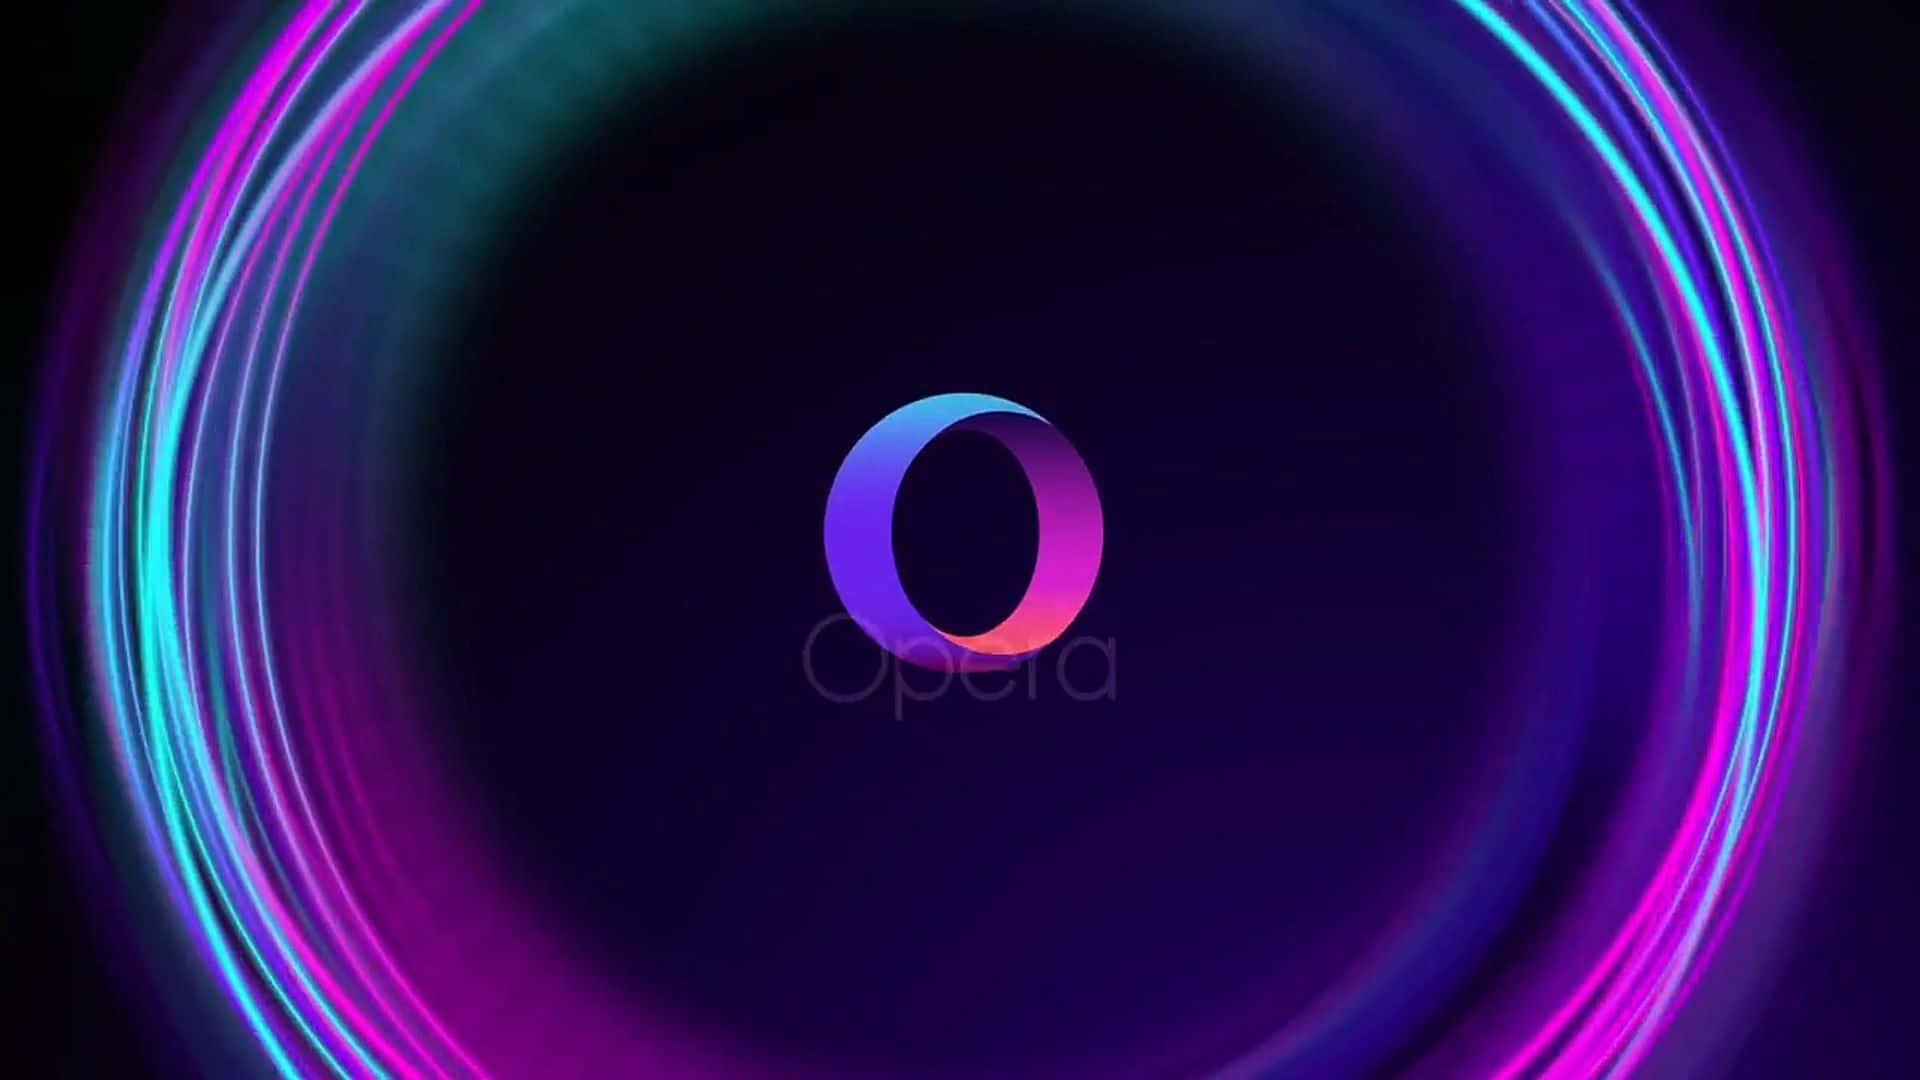 A Purple And Blue Circle With The Word Opa Wallpaper